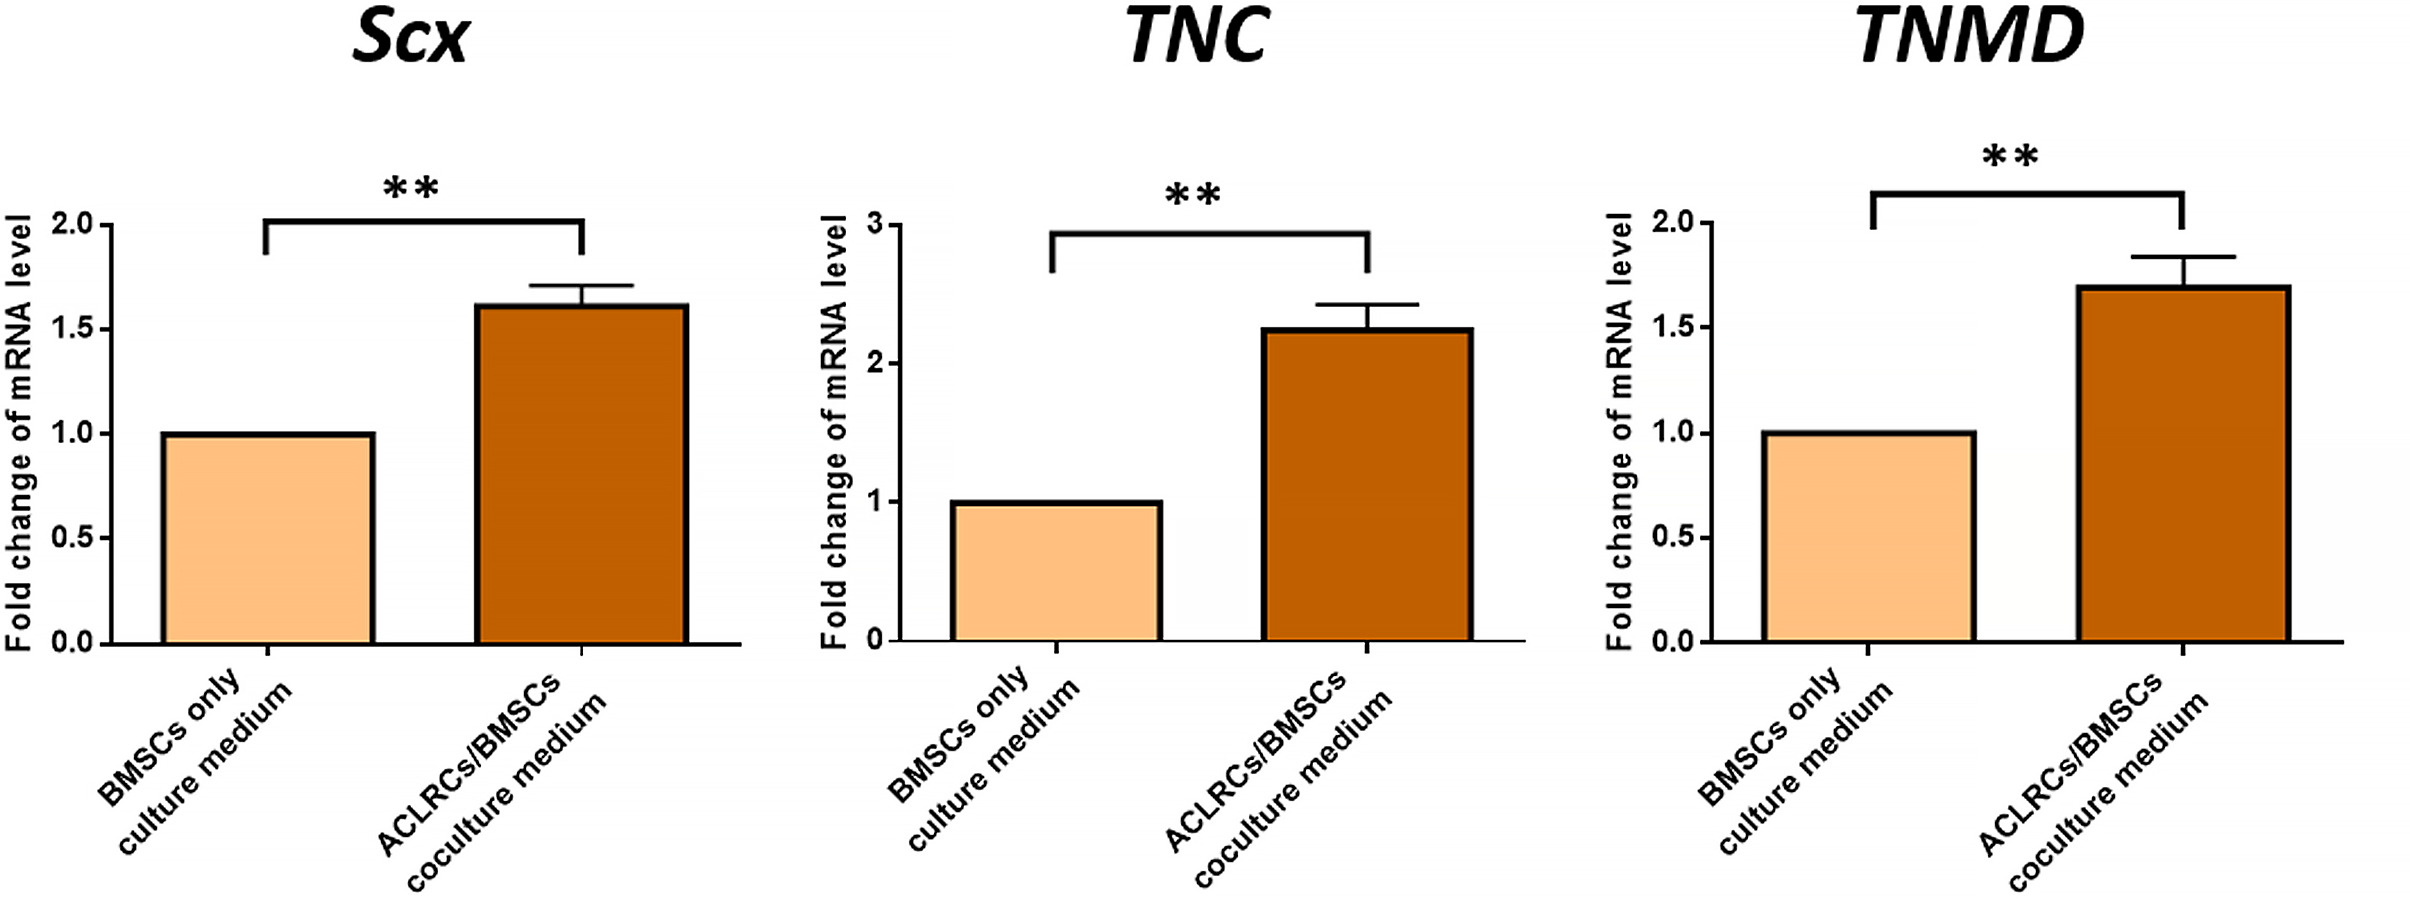 Fig. 7 
            Effects of anterior cruciate ligament remnant cells (ACLRCs)/bone marrow stromal cells (BMSCs) co-culture medium on hamstring tenocytes on the expression of tenogenesis genes (scleraxis (SCX), tenascin C (TNC), and tenomodulin (TNMD)). The hamstring tenocytes show significantly higher gene expression of tenogenic markers (SCX, TNC, TNMD) after co-culture medium (n = 6) treatment compared to that of BMSCs-only culture medium (n = 6). Data are indicated as mean (standard deviation) of triplicate measurements and analyzed with paired t-test. **p < 0.01. mRNA, messenger RNA.
          